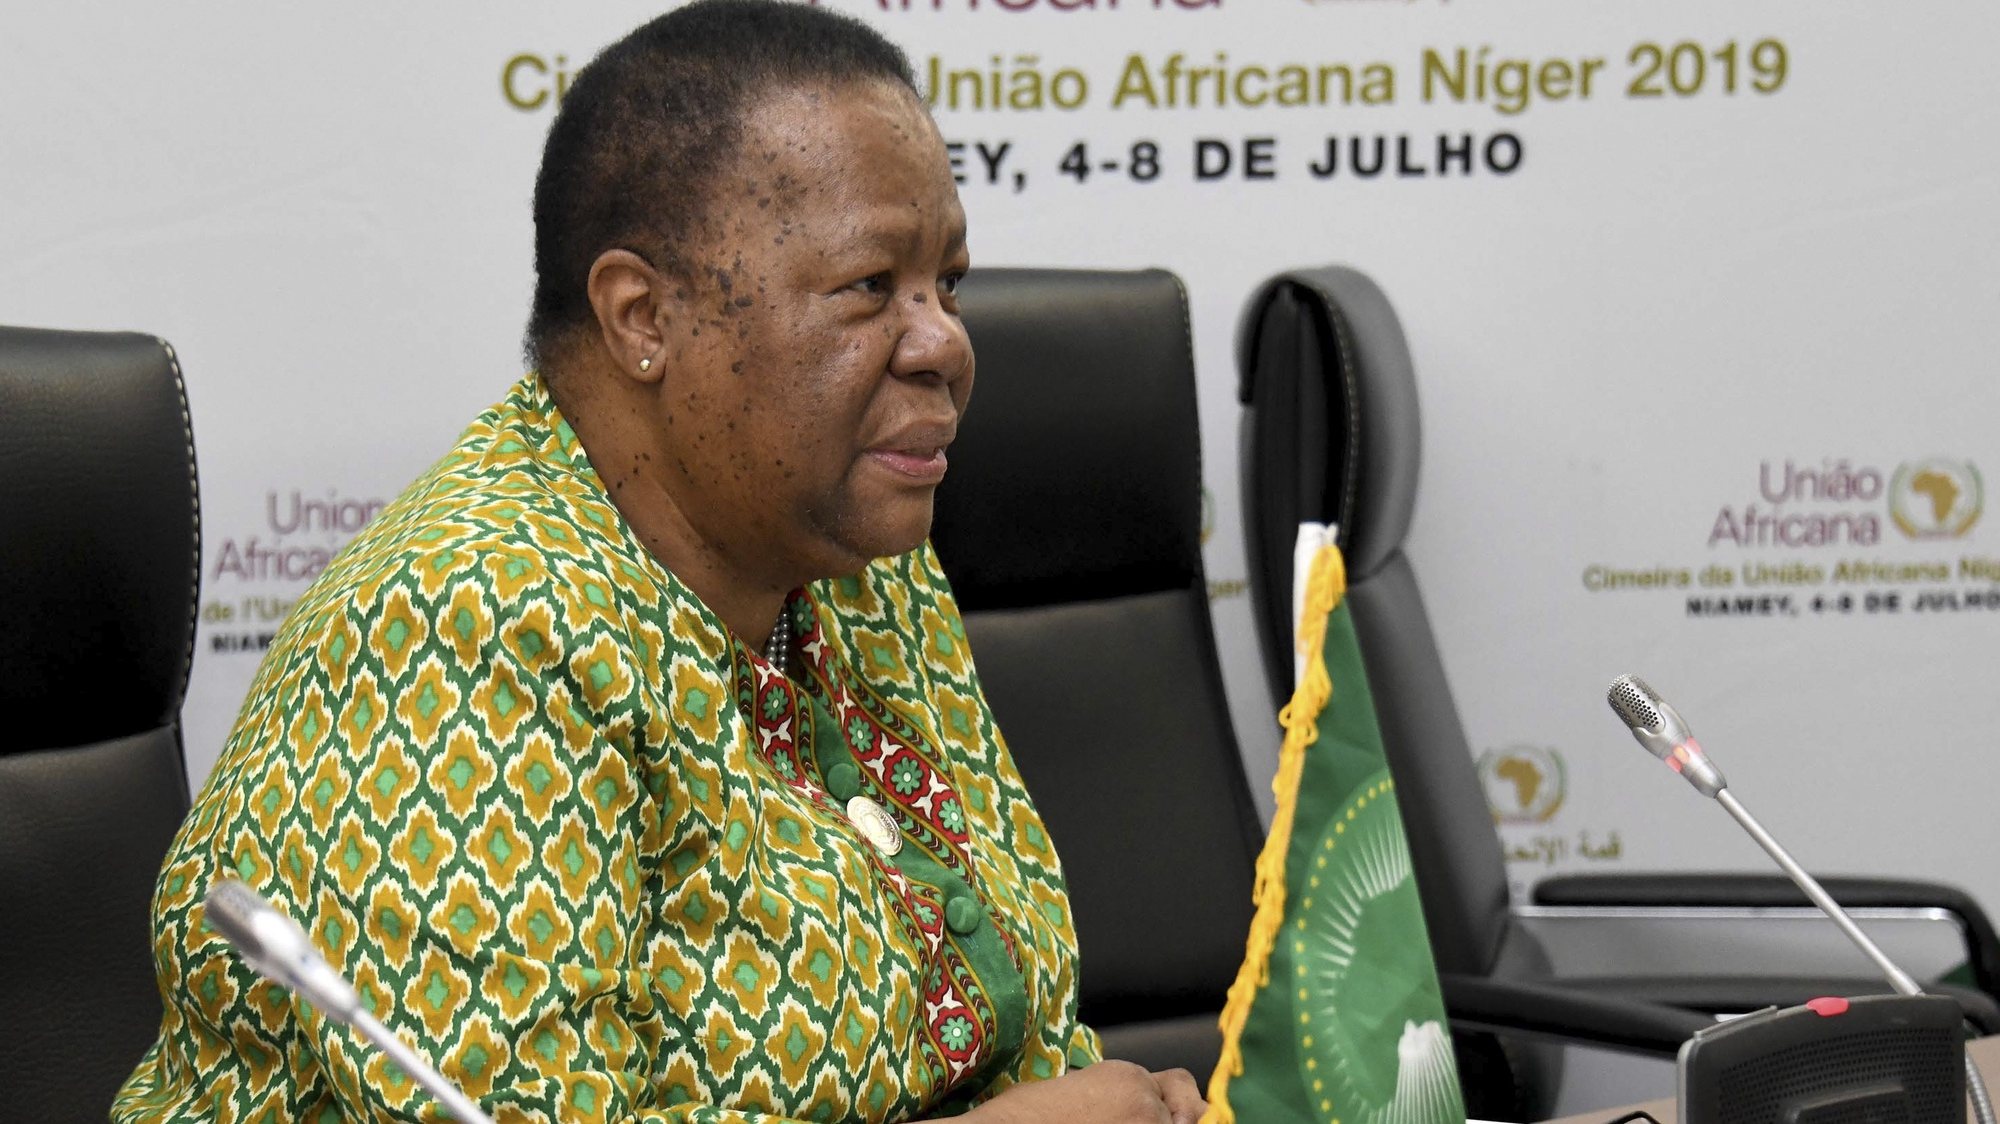 epa07699579 A handout photo made available by the South African Government Communication and Information System (GCIS) shows South Africa&#039;s Minister of International Relations and Cooperation Naledi Pandor attending a meeting on Sudan at the 55th African Union Summit in Niamey, Niger, 06 July 2019. African leaders are in Niger to discuss the African Continental Free Trade Area (AfCFTA).  EPA/JACOLINE SCHOONEES / GCIS / HANDOUT  HANDOUT EDITORIAL USE ONLY/NO SALES